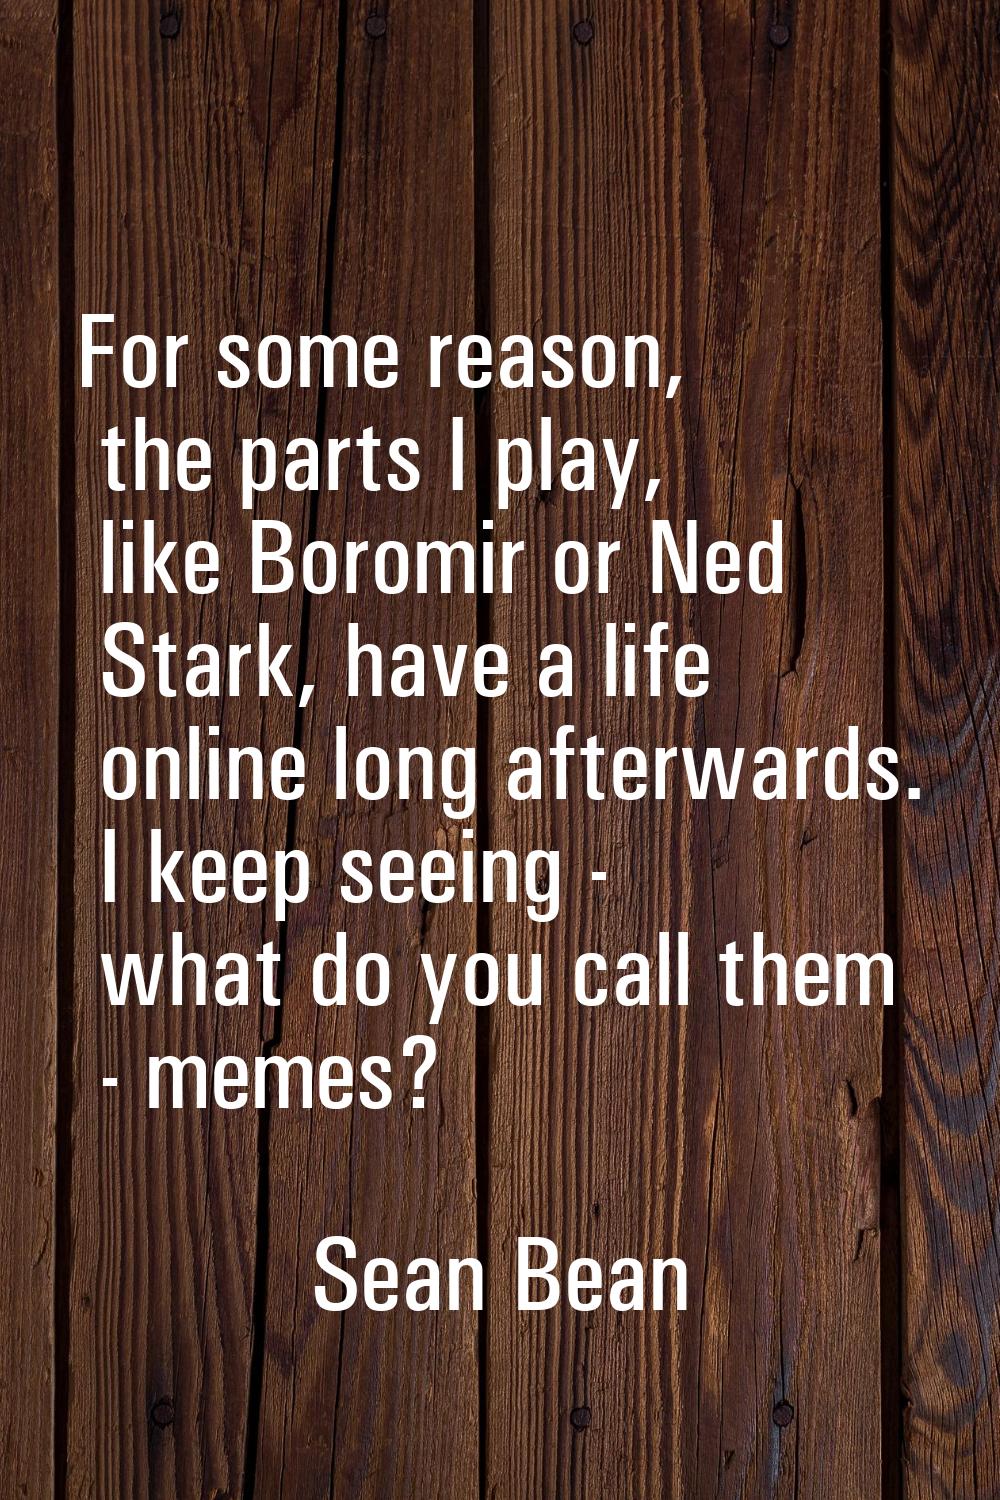 For some reason, the parts I play, like Boromir or Ned Stark, have a life online long afterwards. I